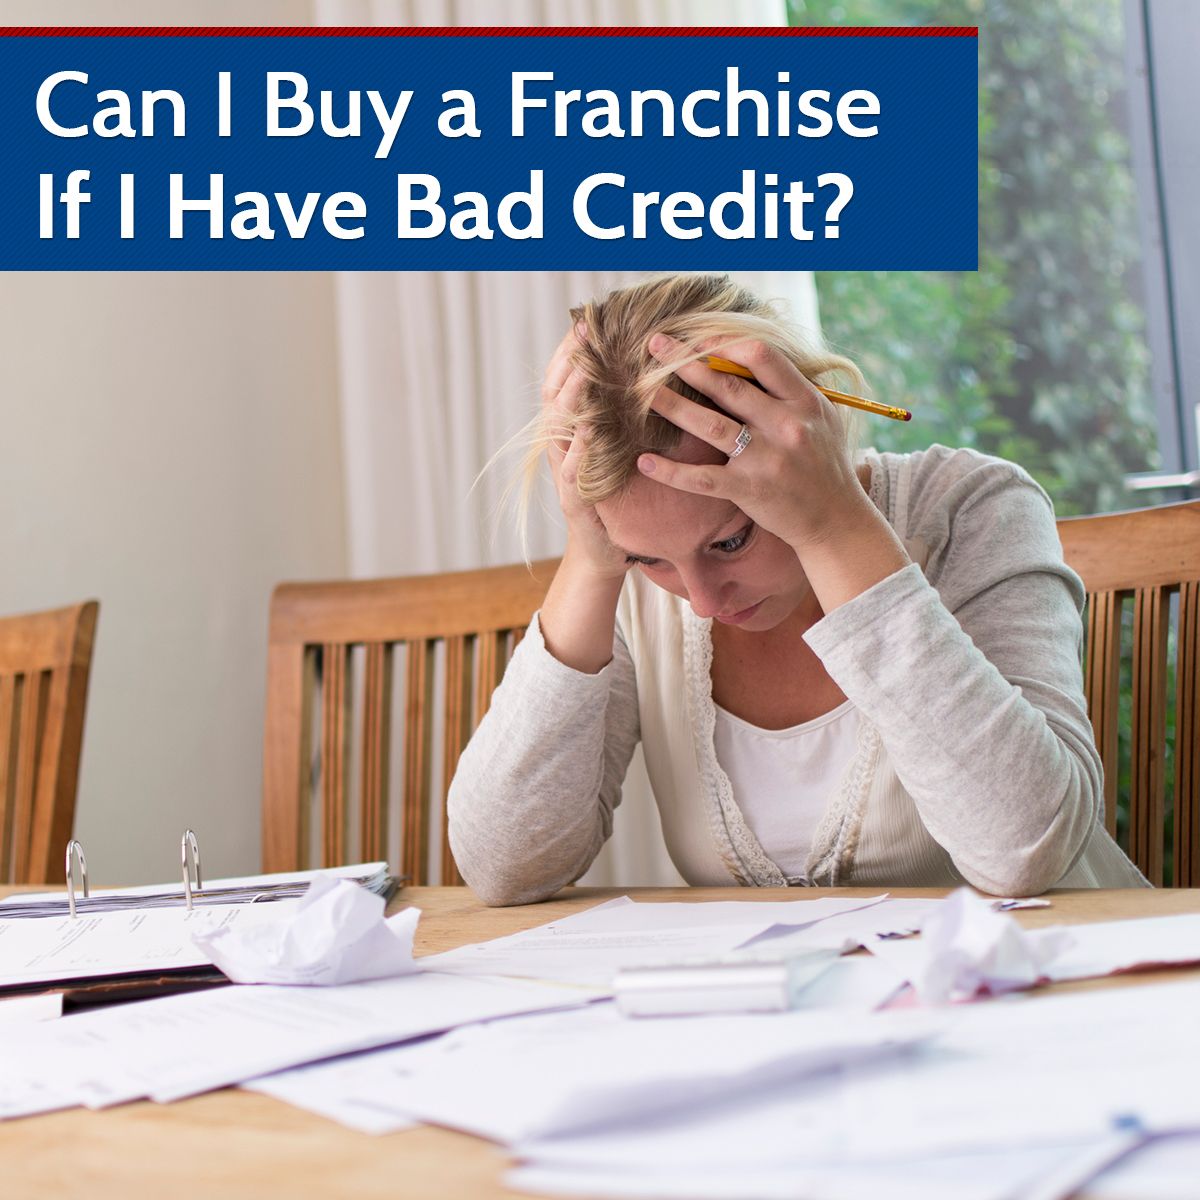 Can I Buy a Franchise If I Have Bad Credit?